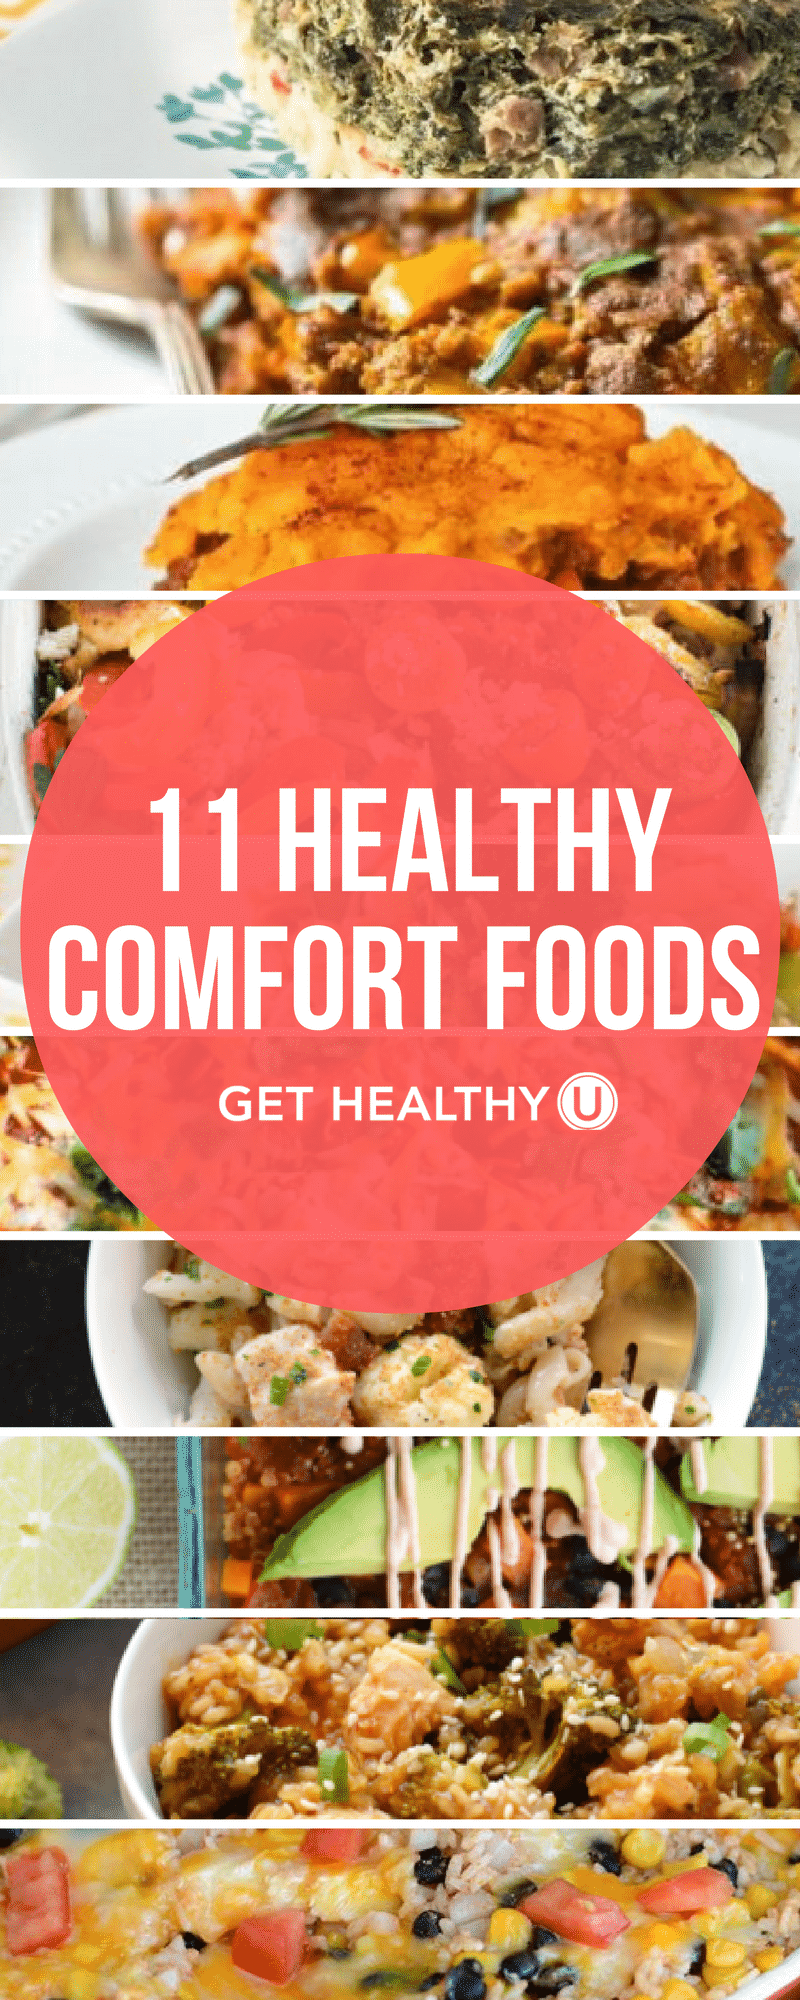 Check out these 11 healthy comfort foods!